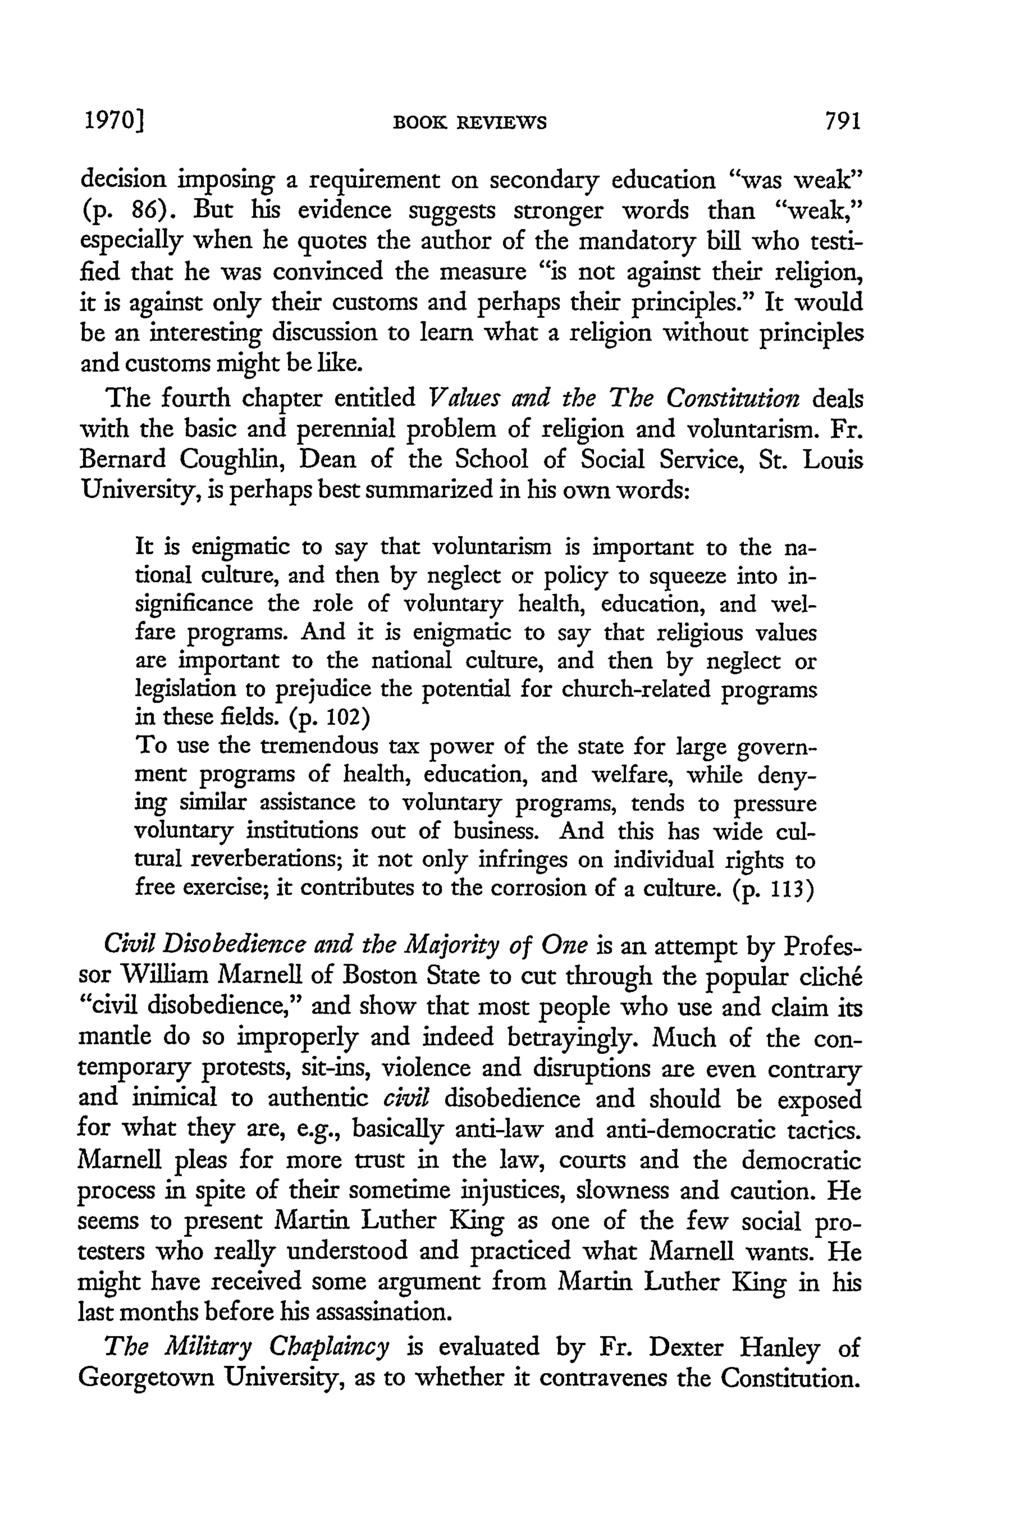 1970] BOOK REVIEWS decision imposing a requirement on secondary education "was weak" (p. 86).